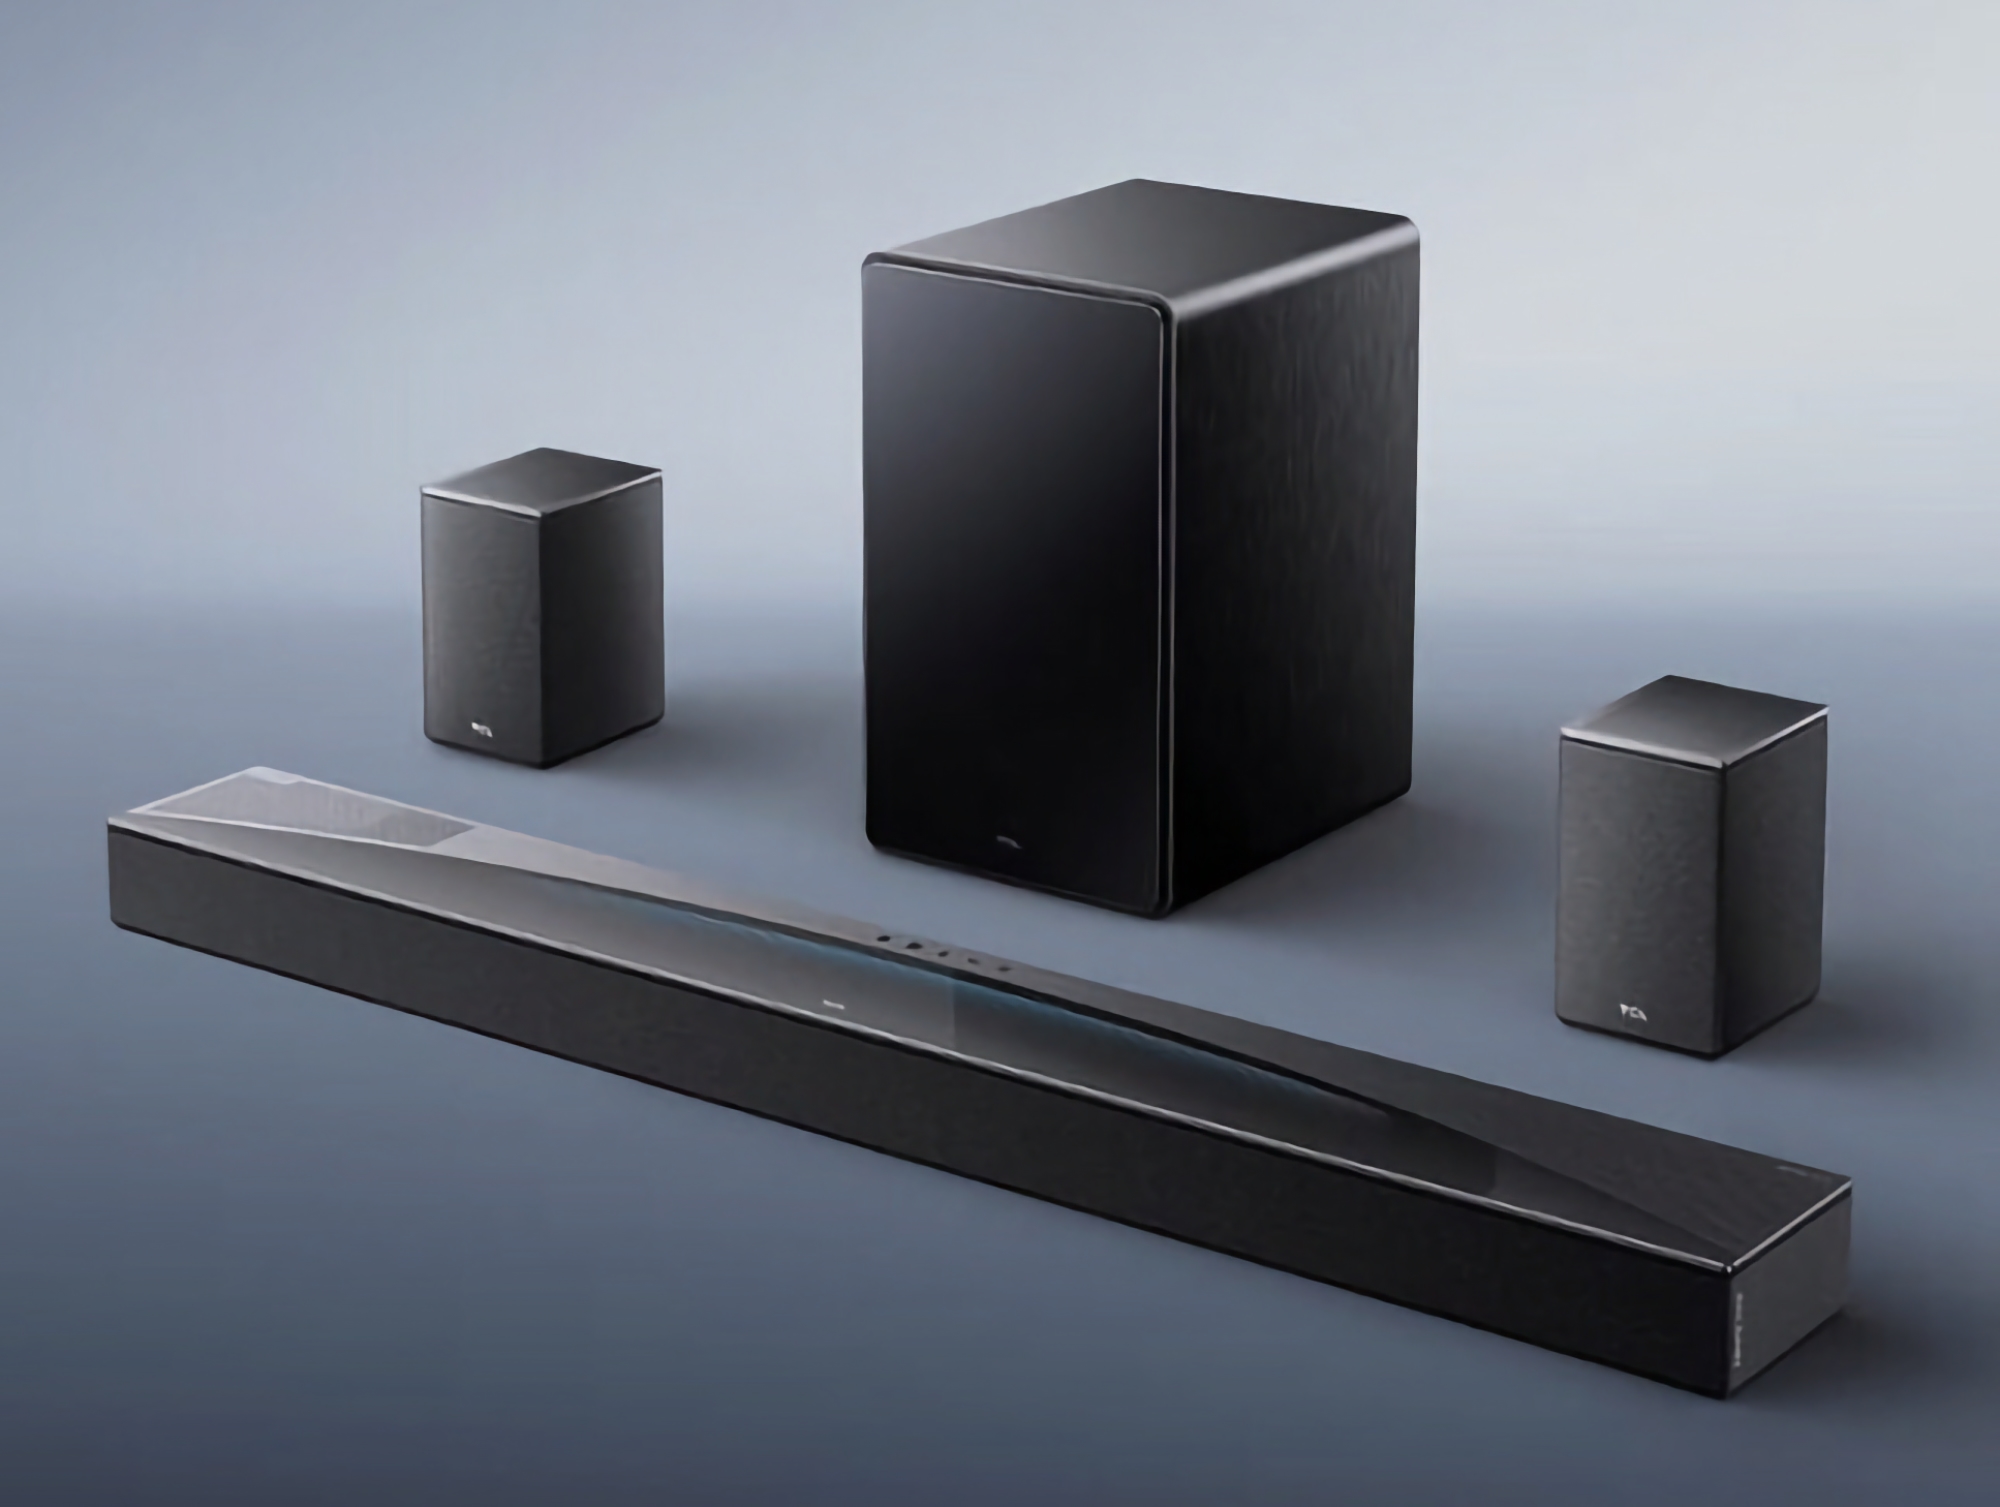 TCL unveiled Q85H and Q75H: a range of soundbars with Dolby Atmos and DTS Sound support starting from $372